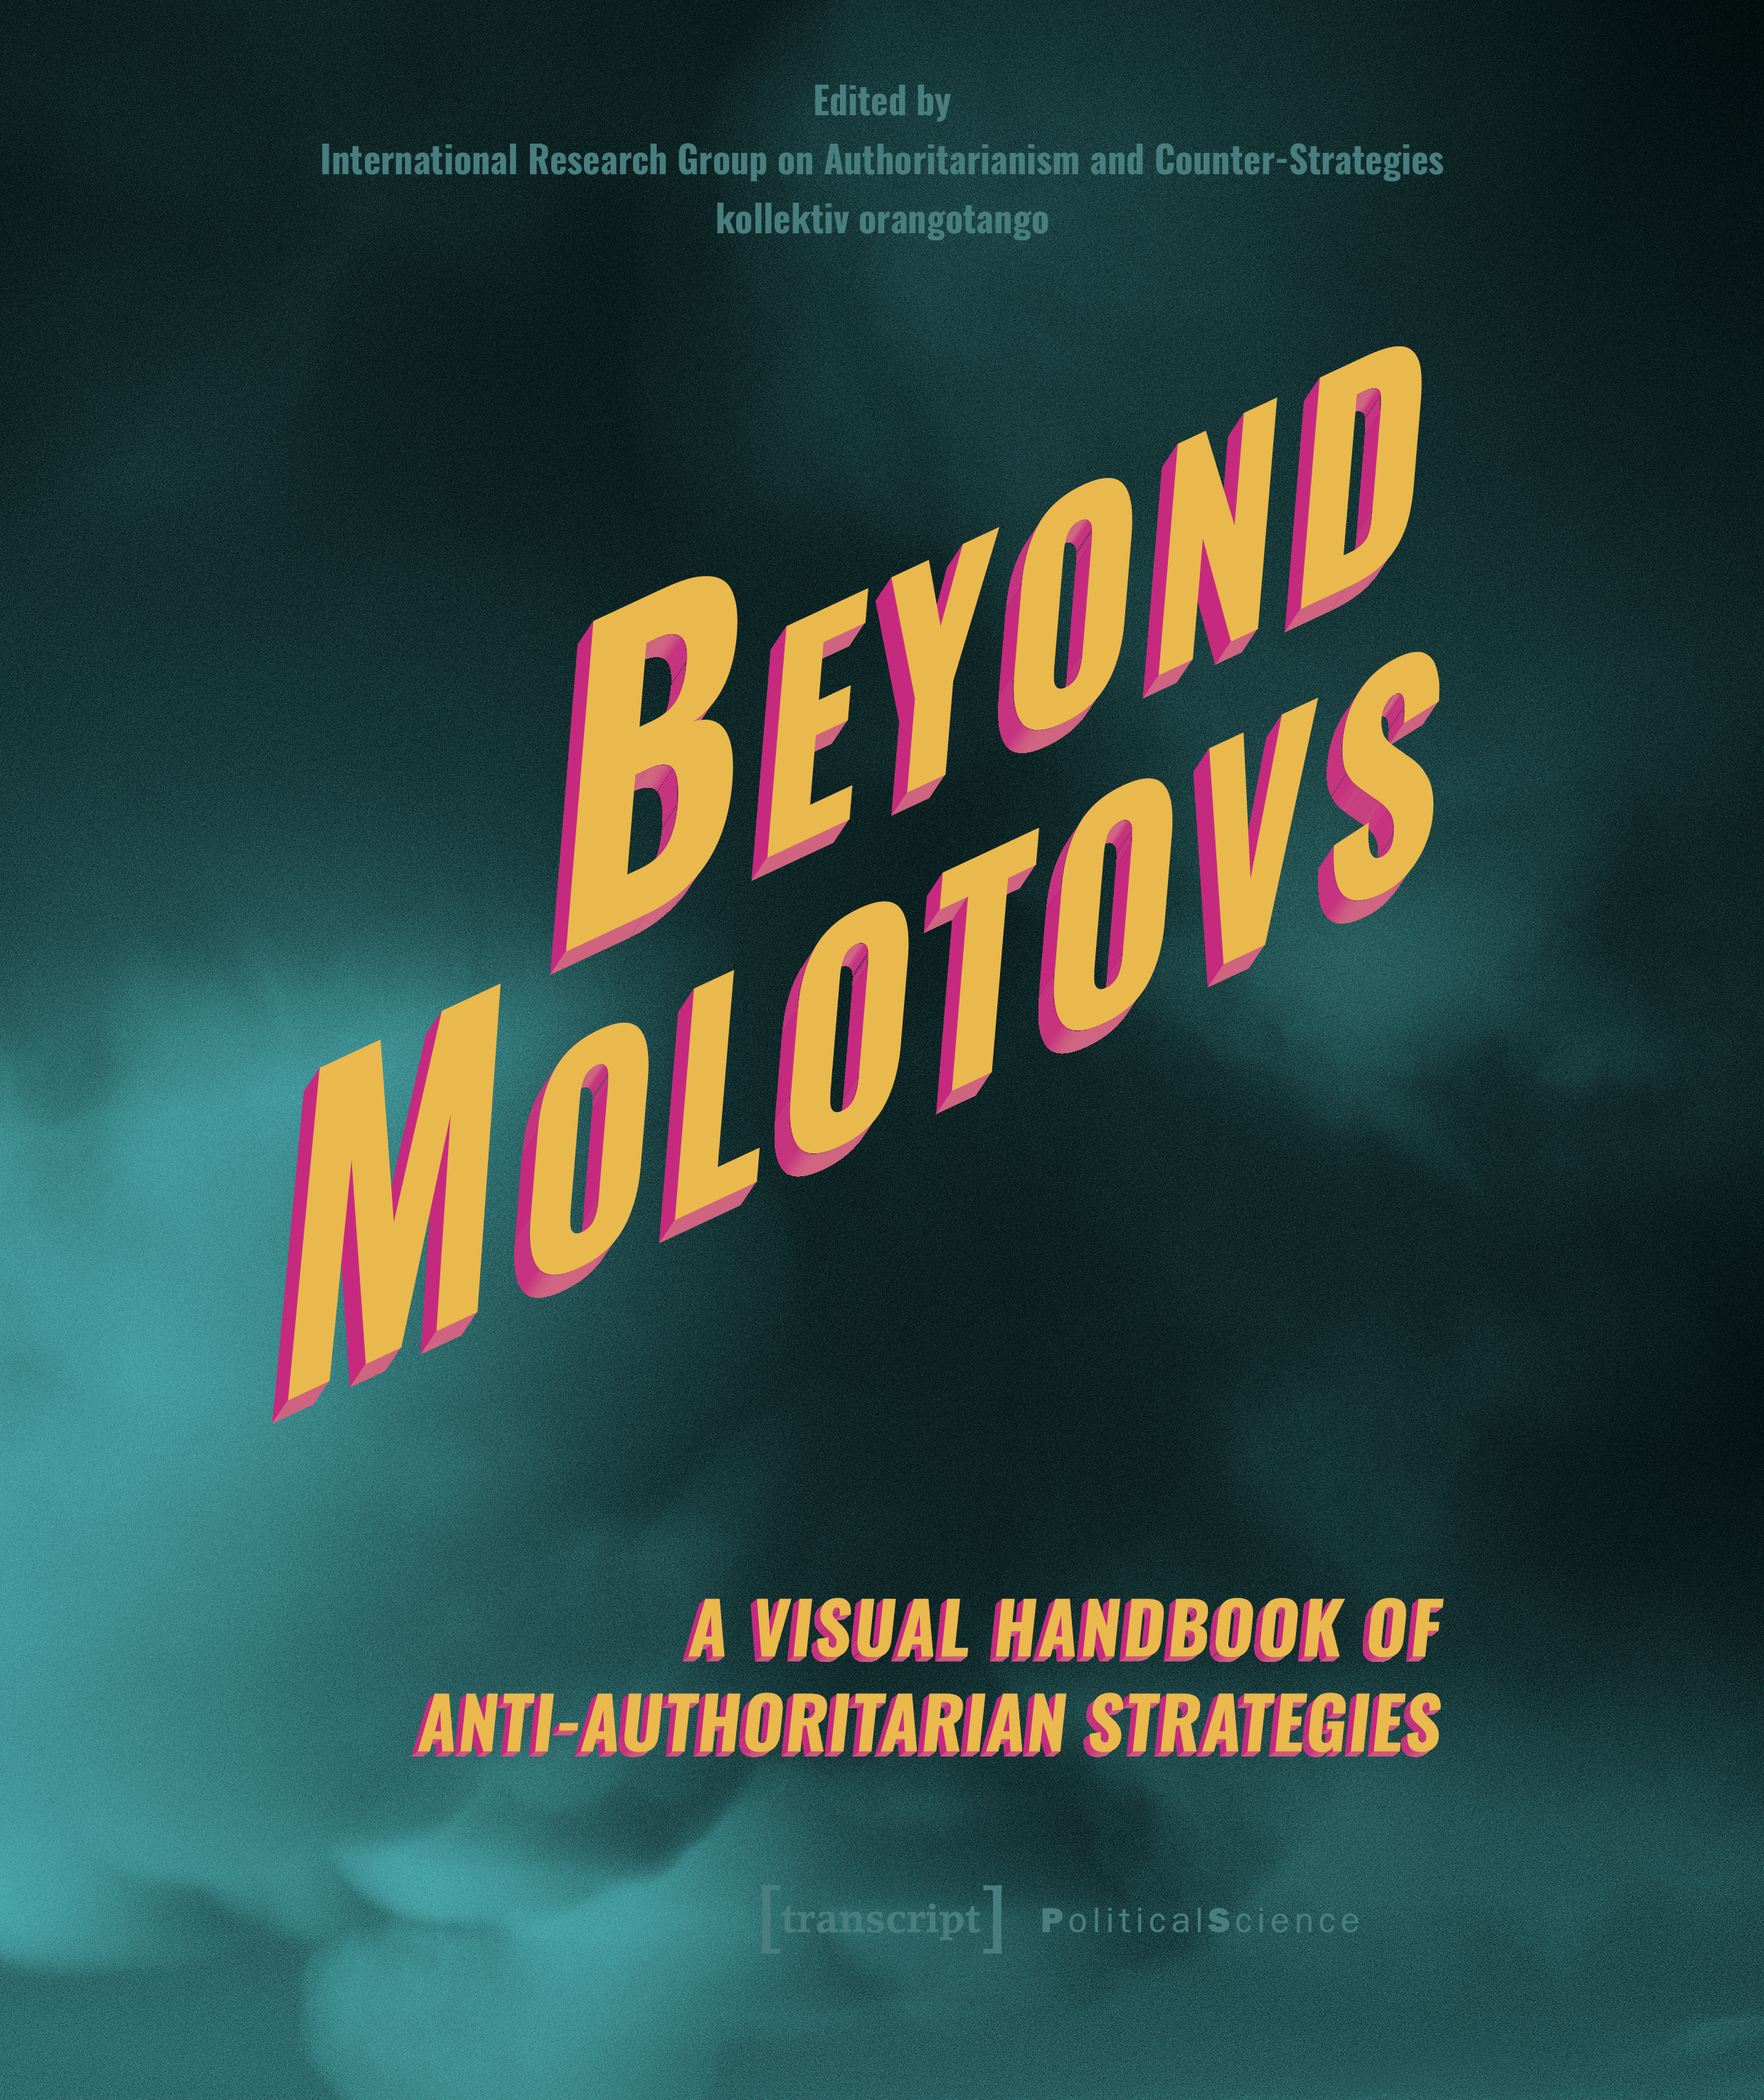 Image of the article »Beyond Molotovs: A Visual Handbook of Anti-Authoritarian Strategies«